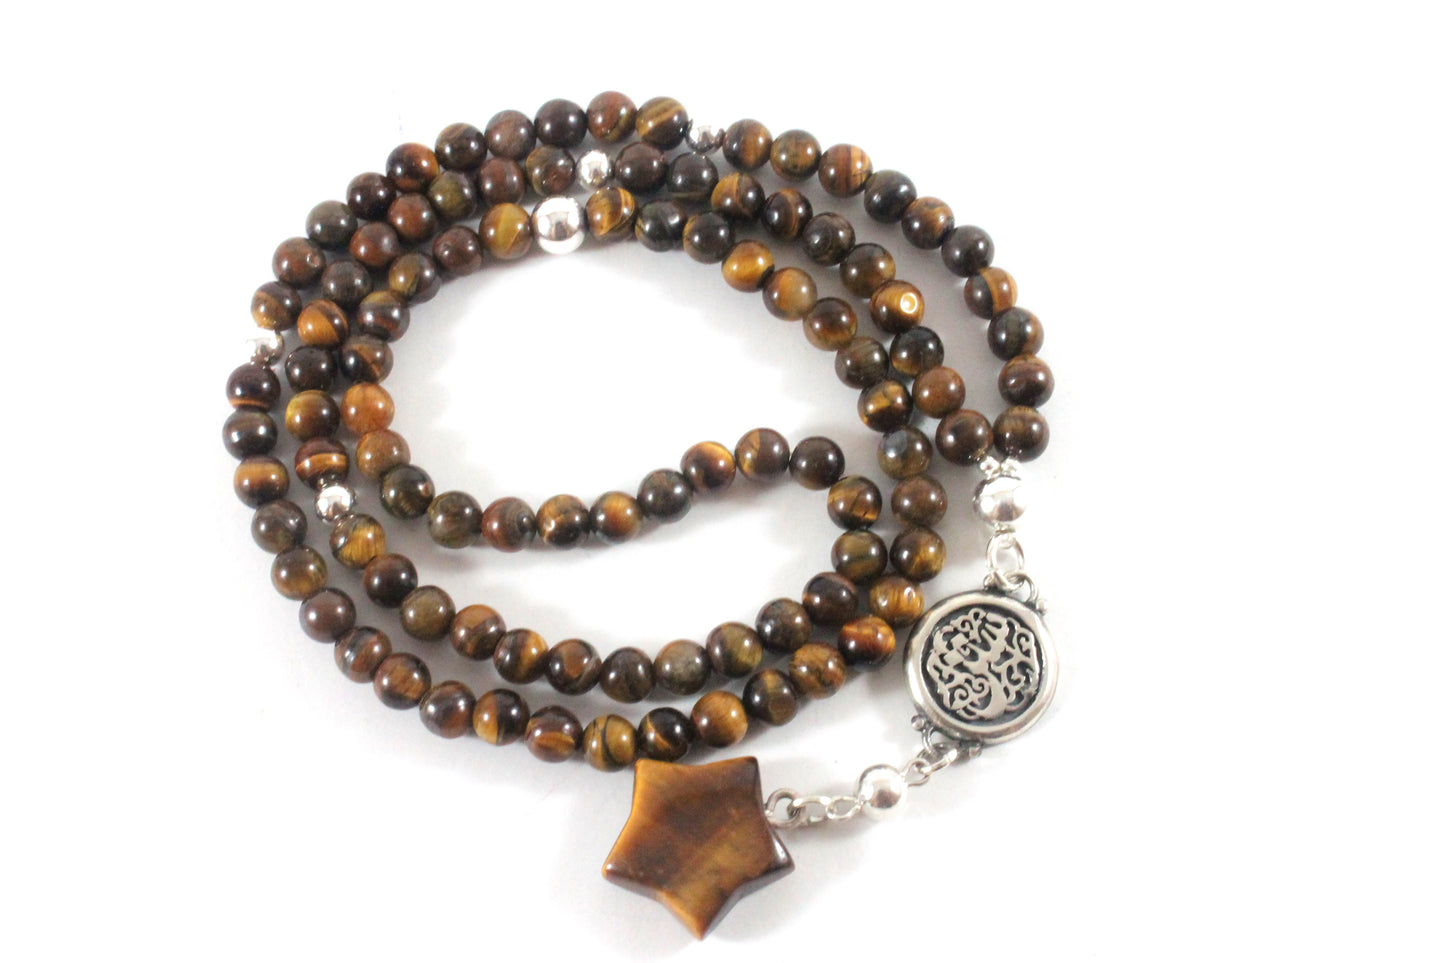 Tiger's Eye Necklace - North Star Collection -The Ricci District